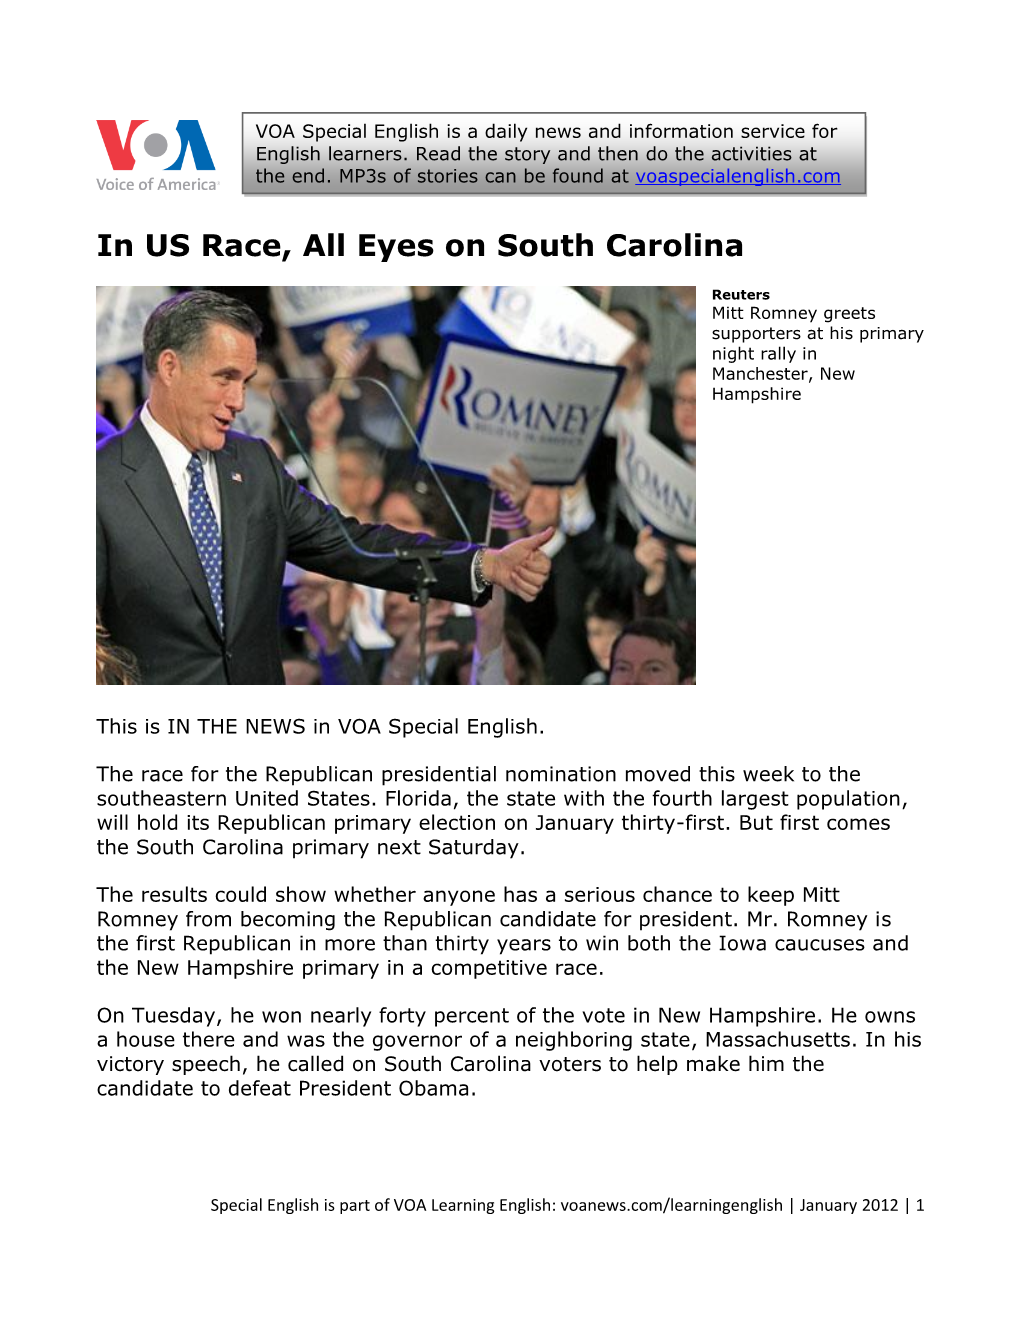 In US Race, All Eyes on South Carolina